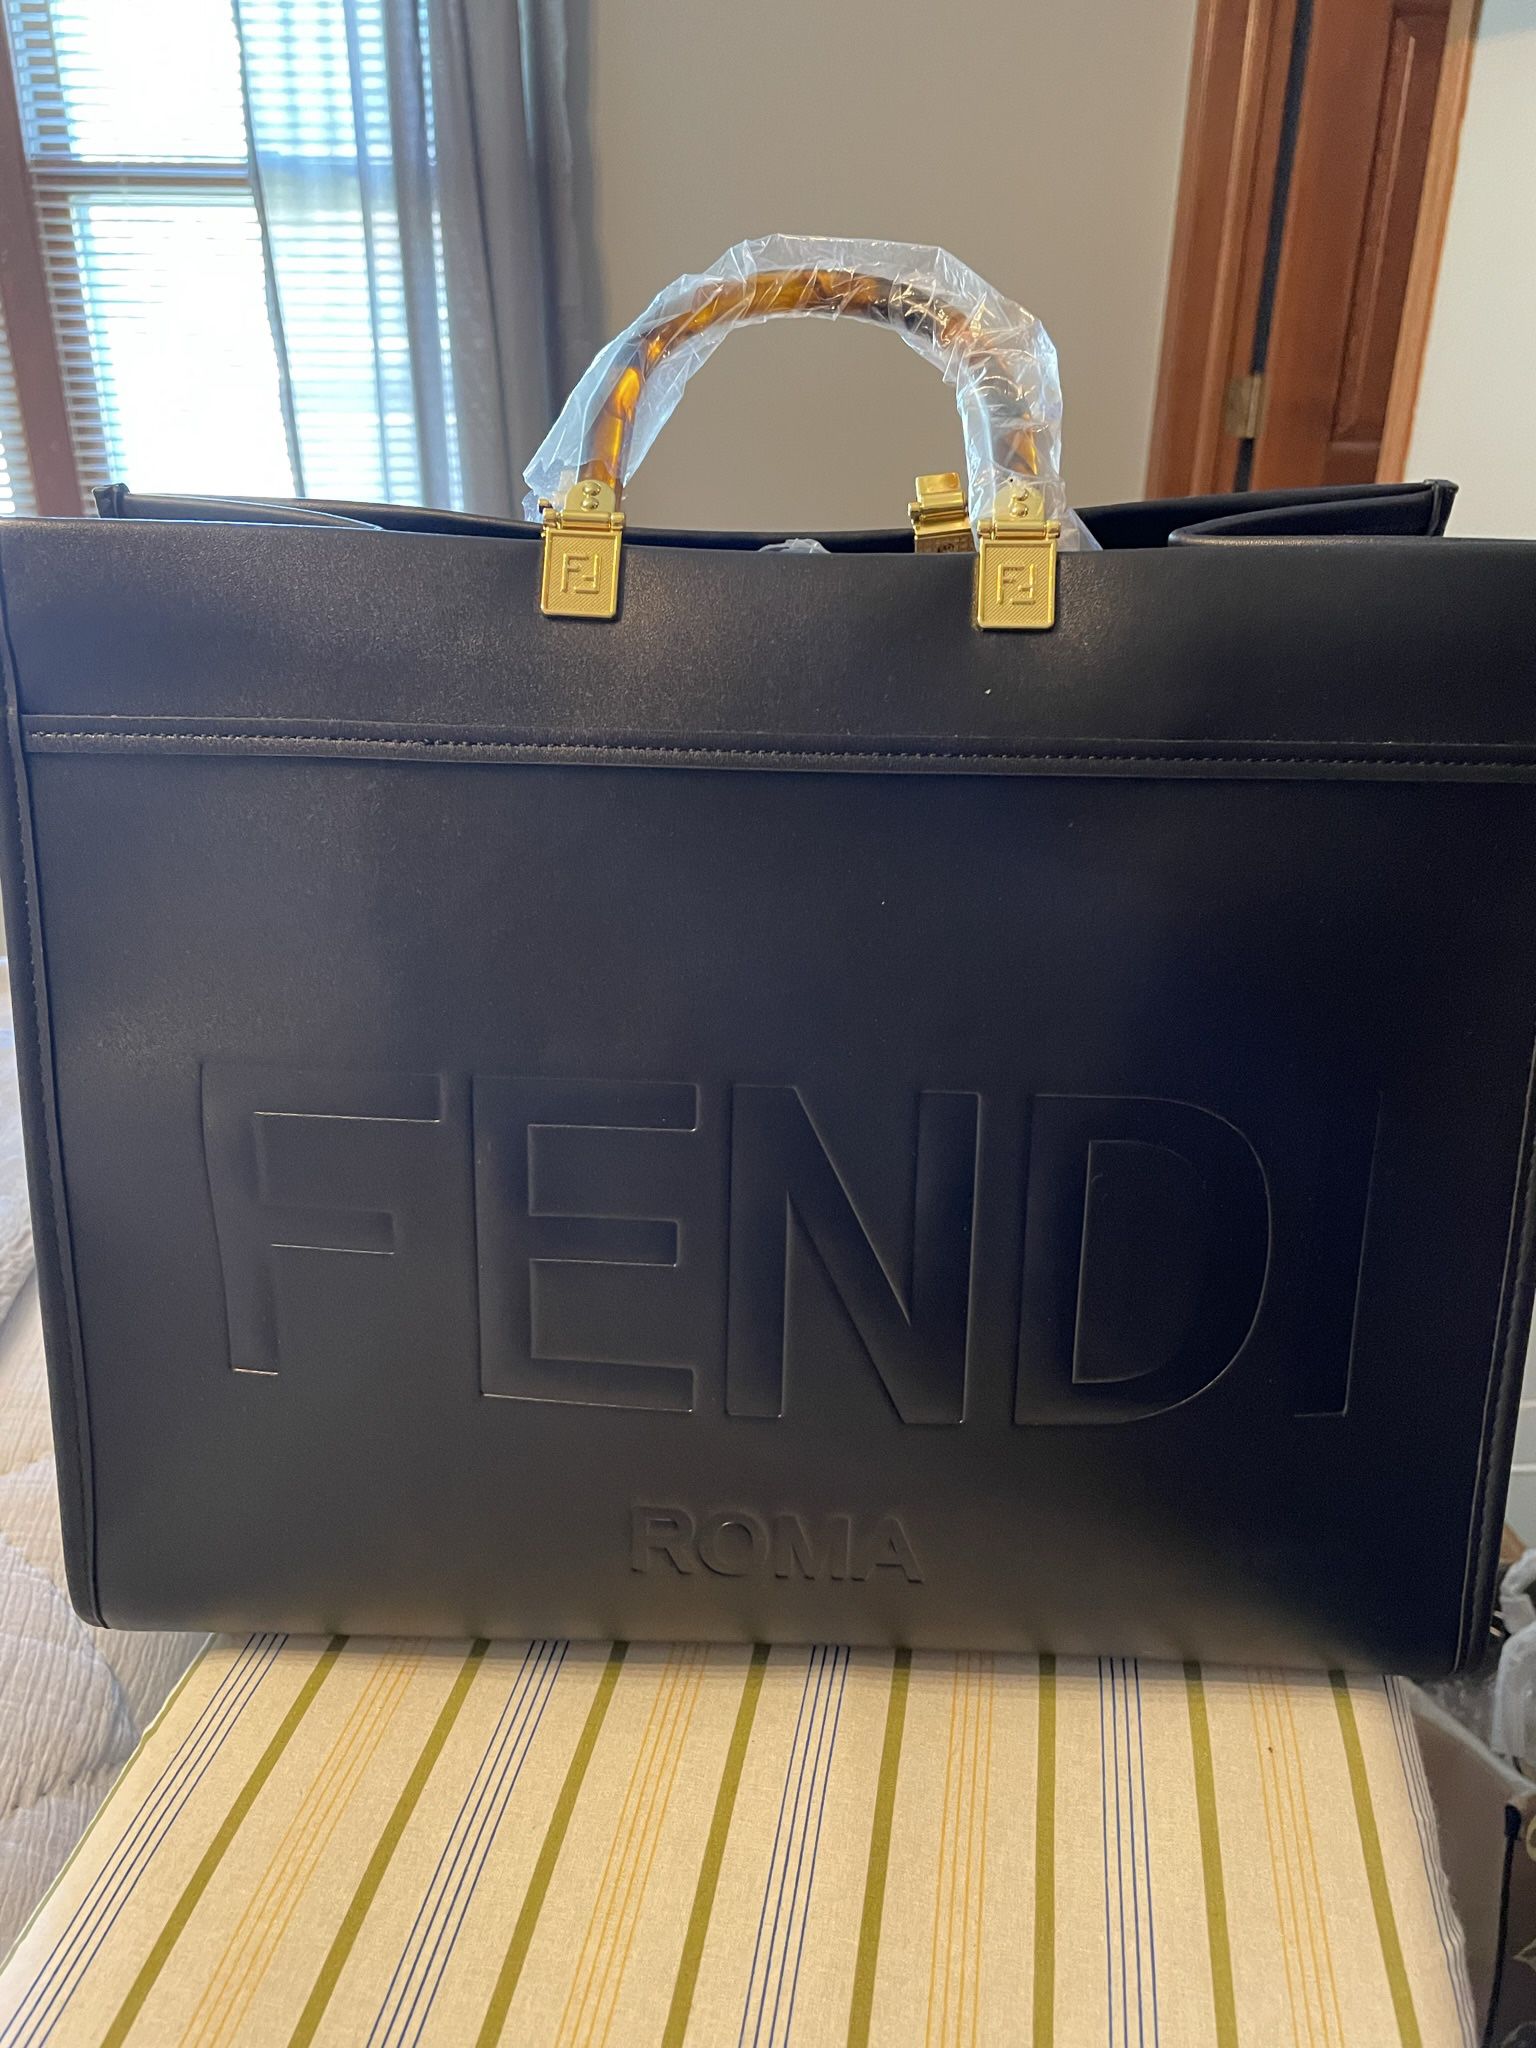 Large Matte Black Fendi Bag!!! Check Out All My Other Stuff!!!￼